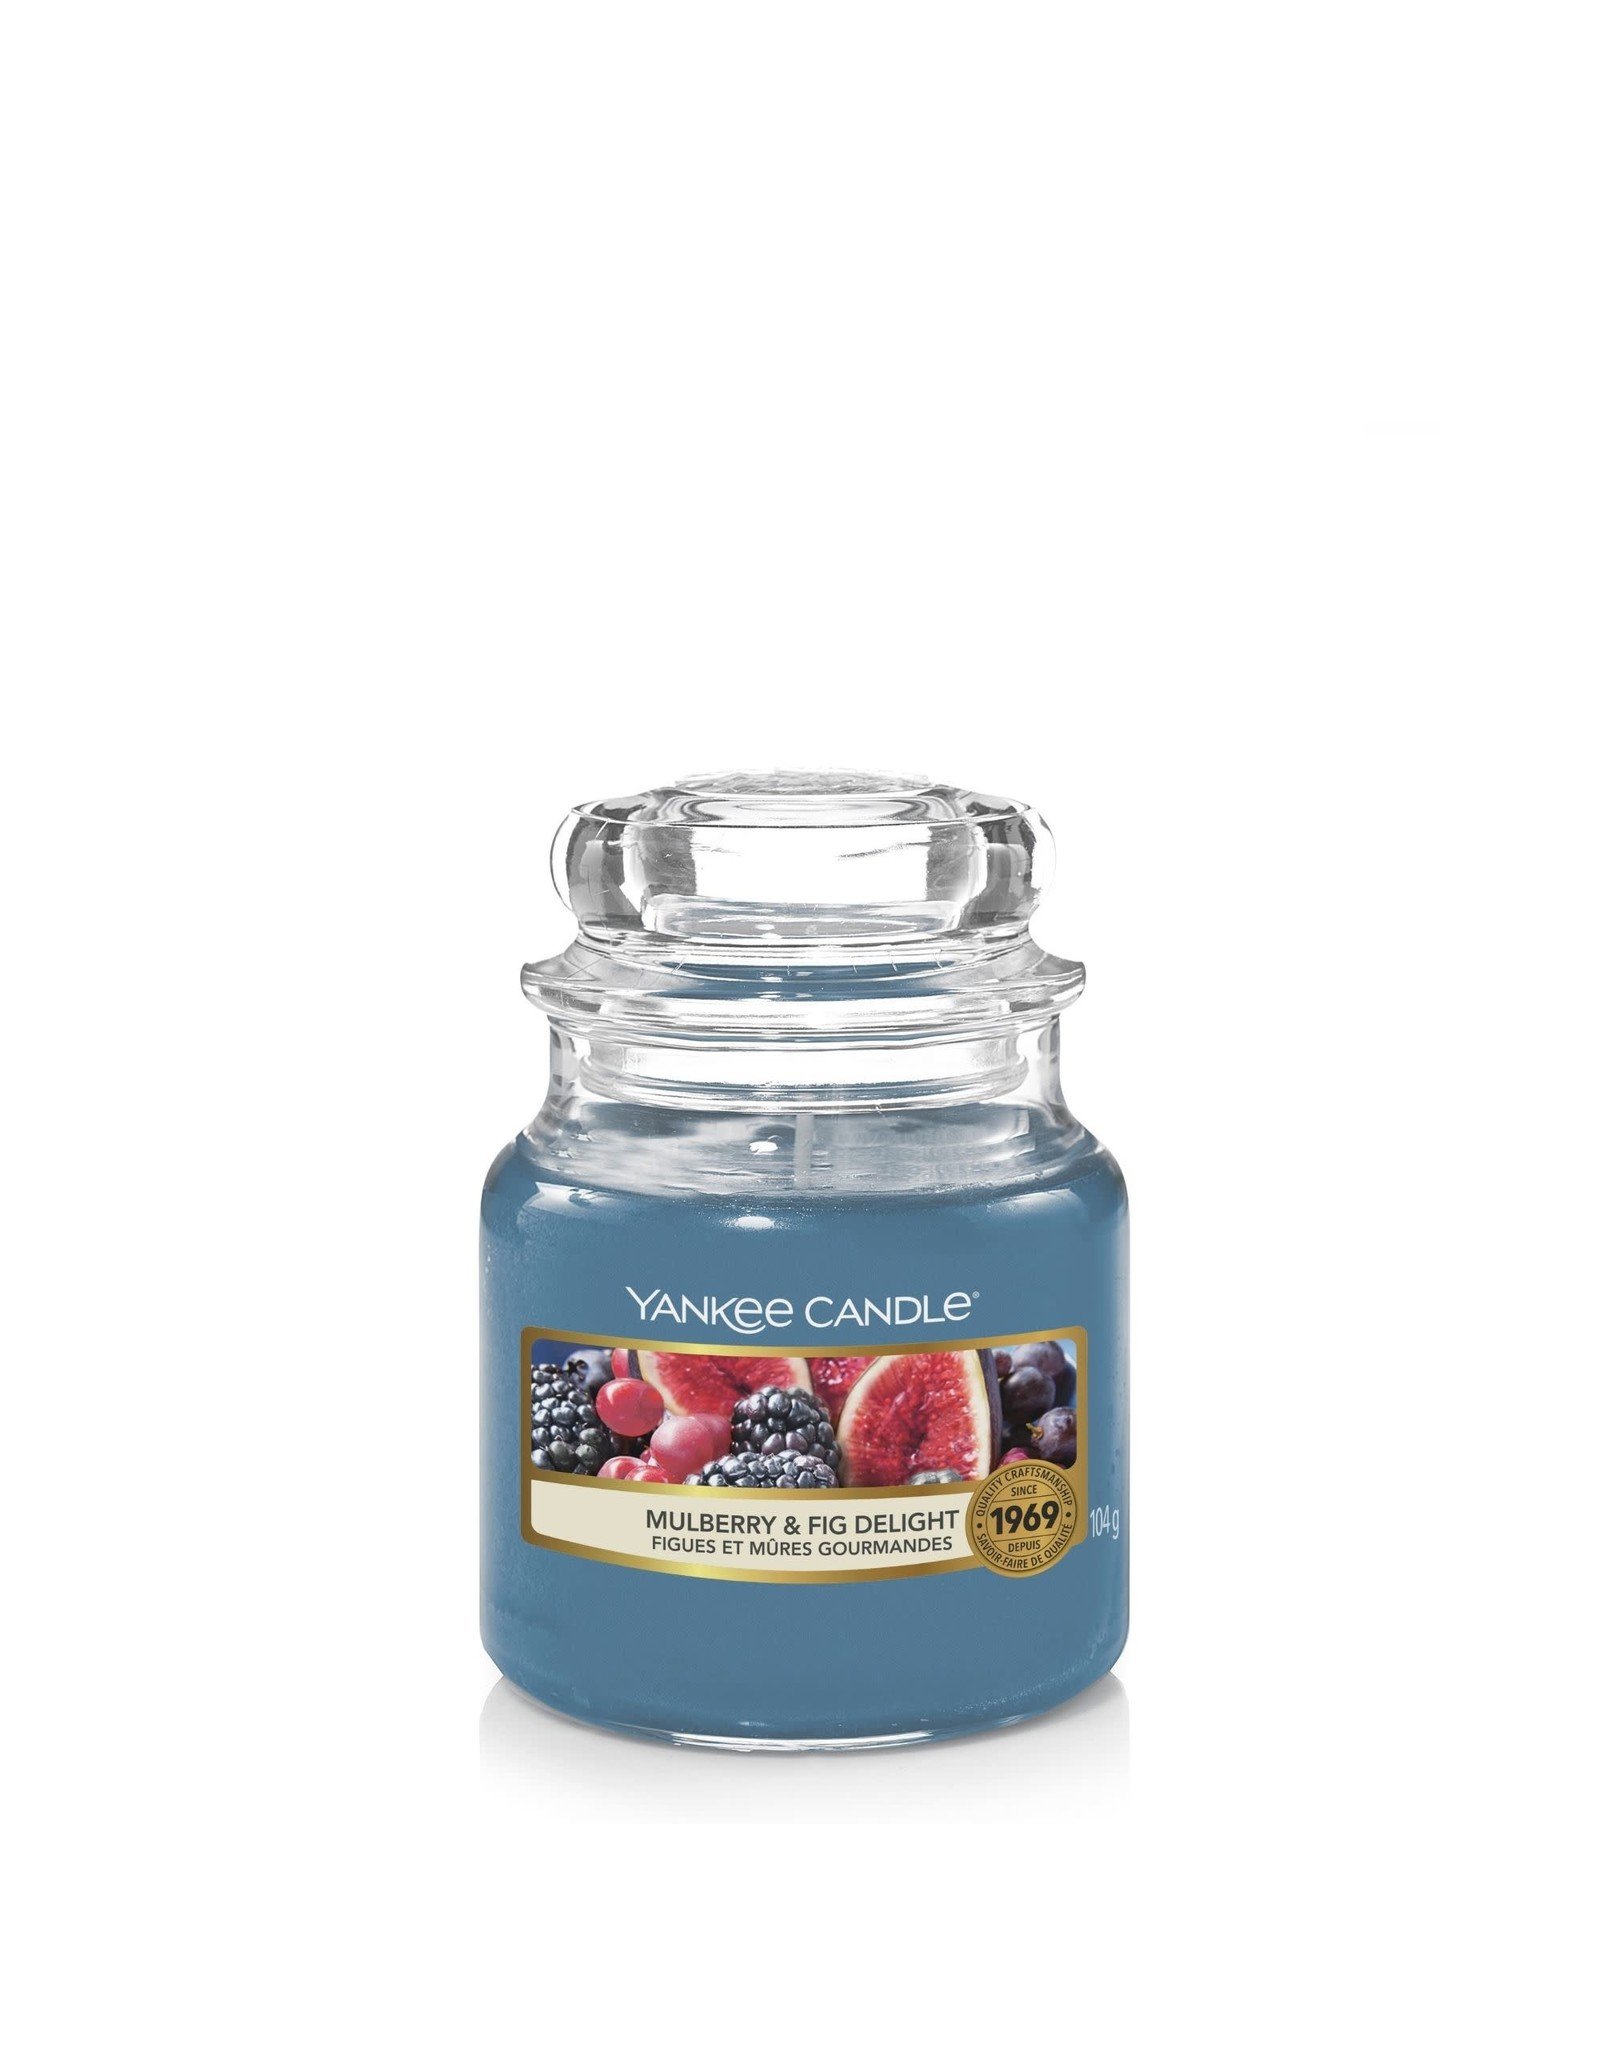 Yankee Candle Mulberry & Fig Delight Small Jar